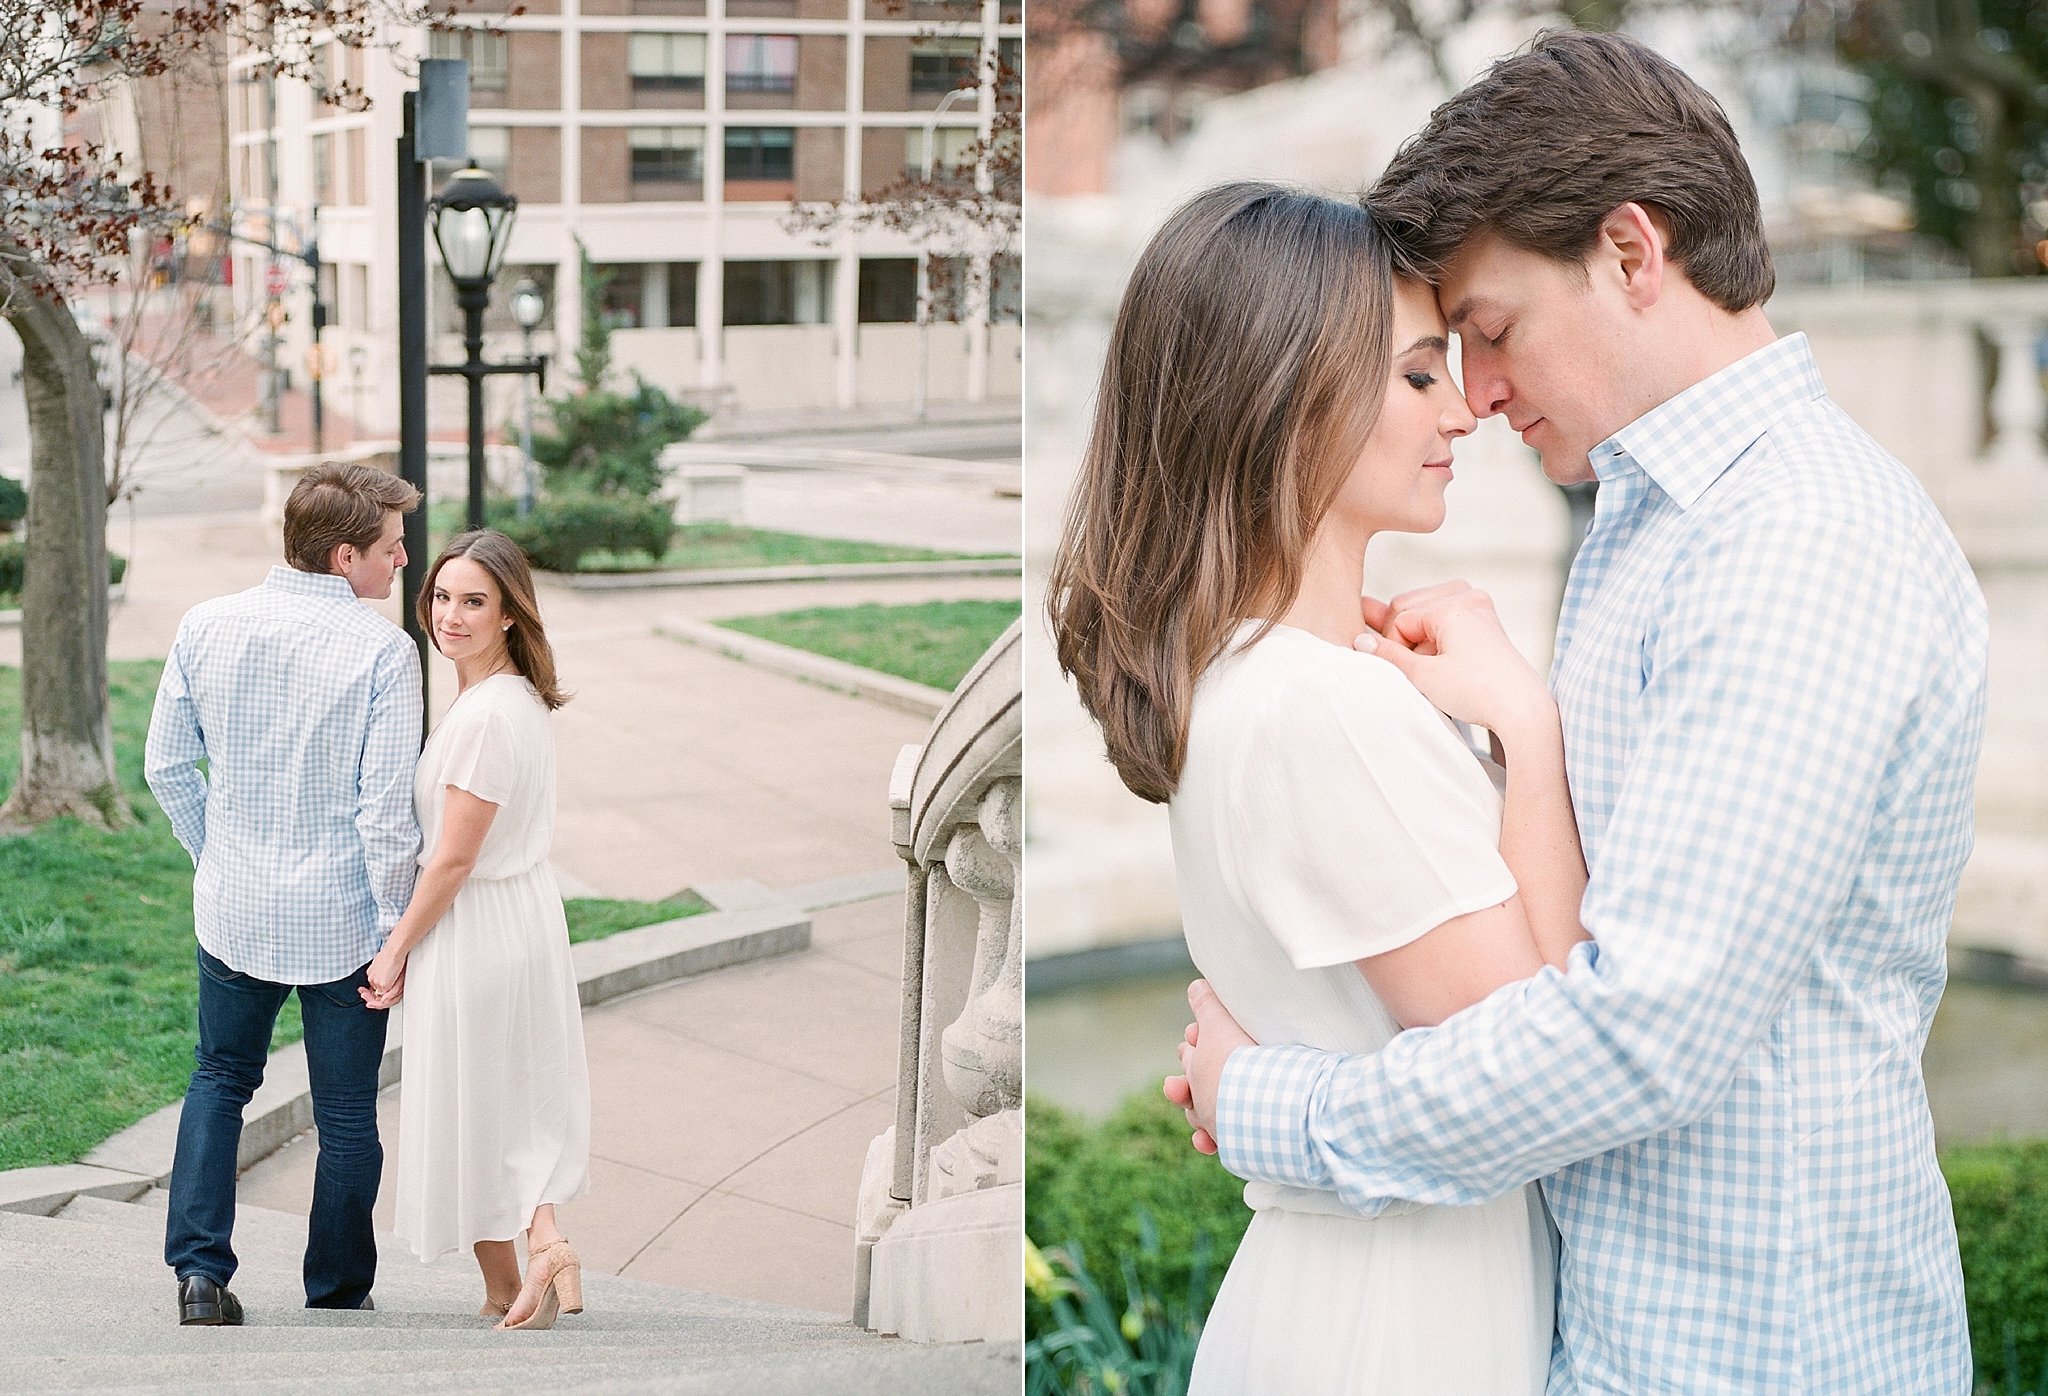 This stylish session is held throughout downtown Baltimore, MD and is photographed by Washington, DC anniversary photographer, Alicia Lacey.